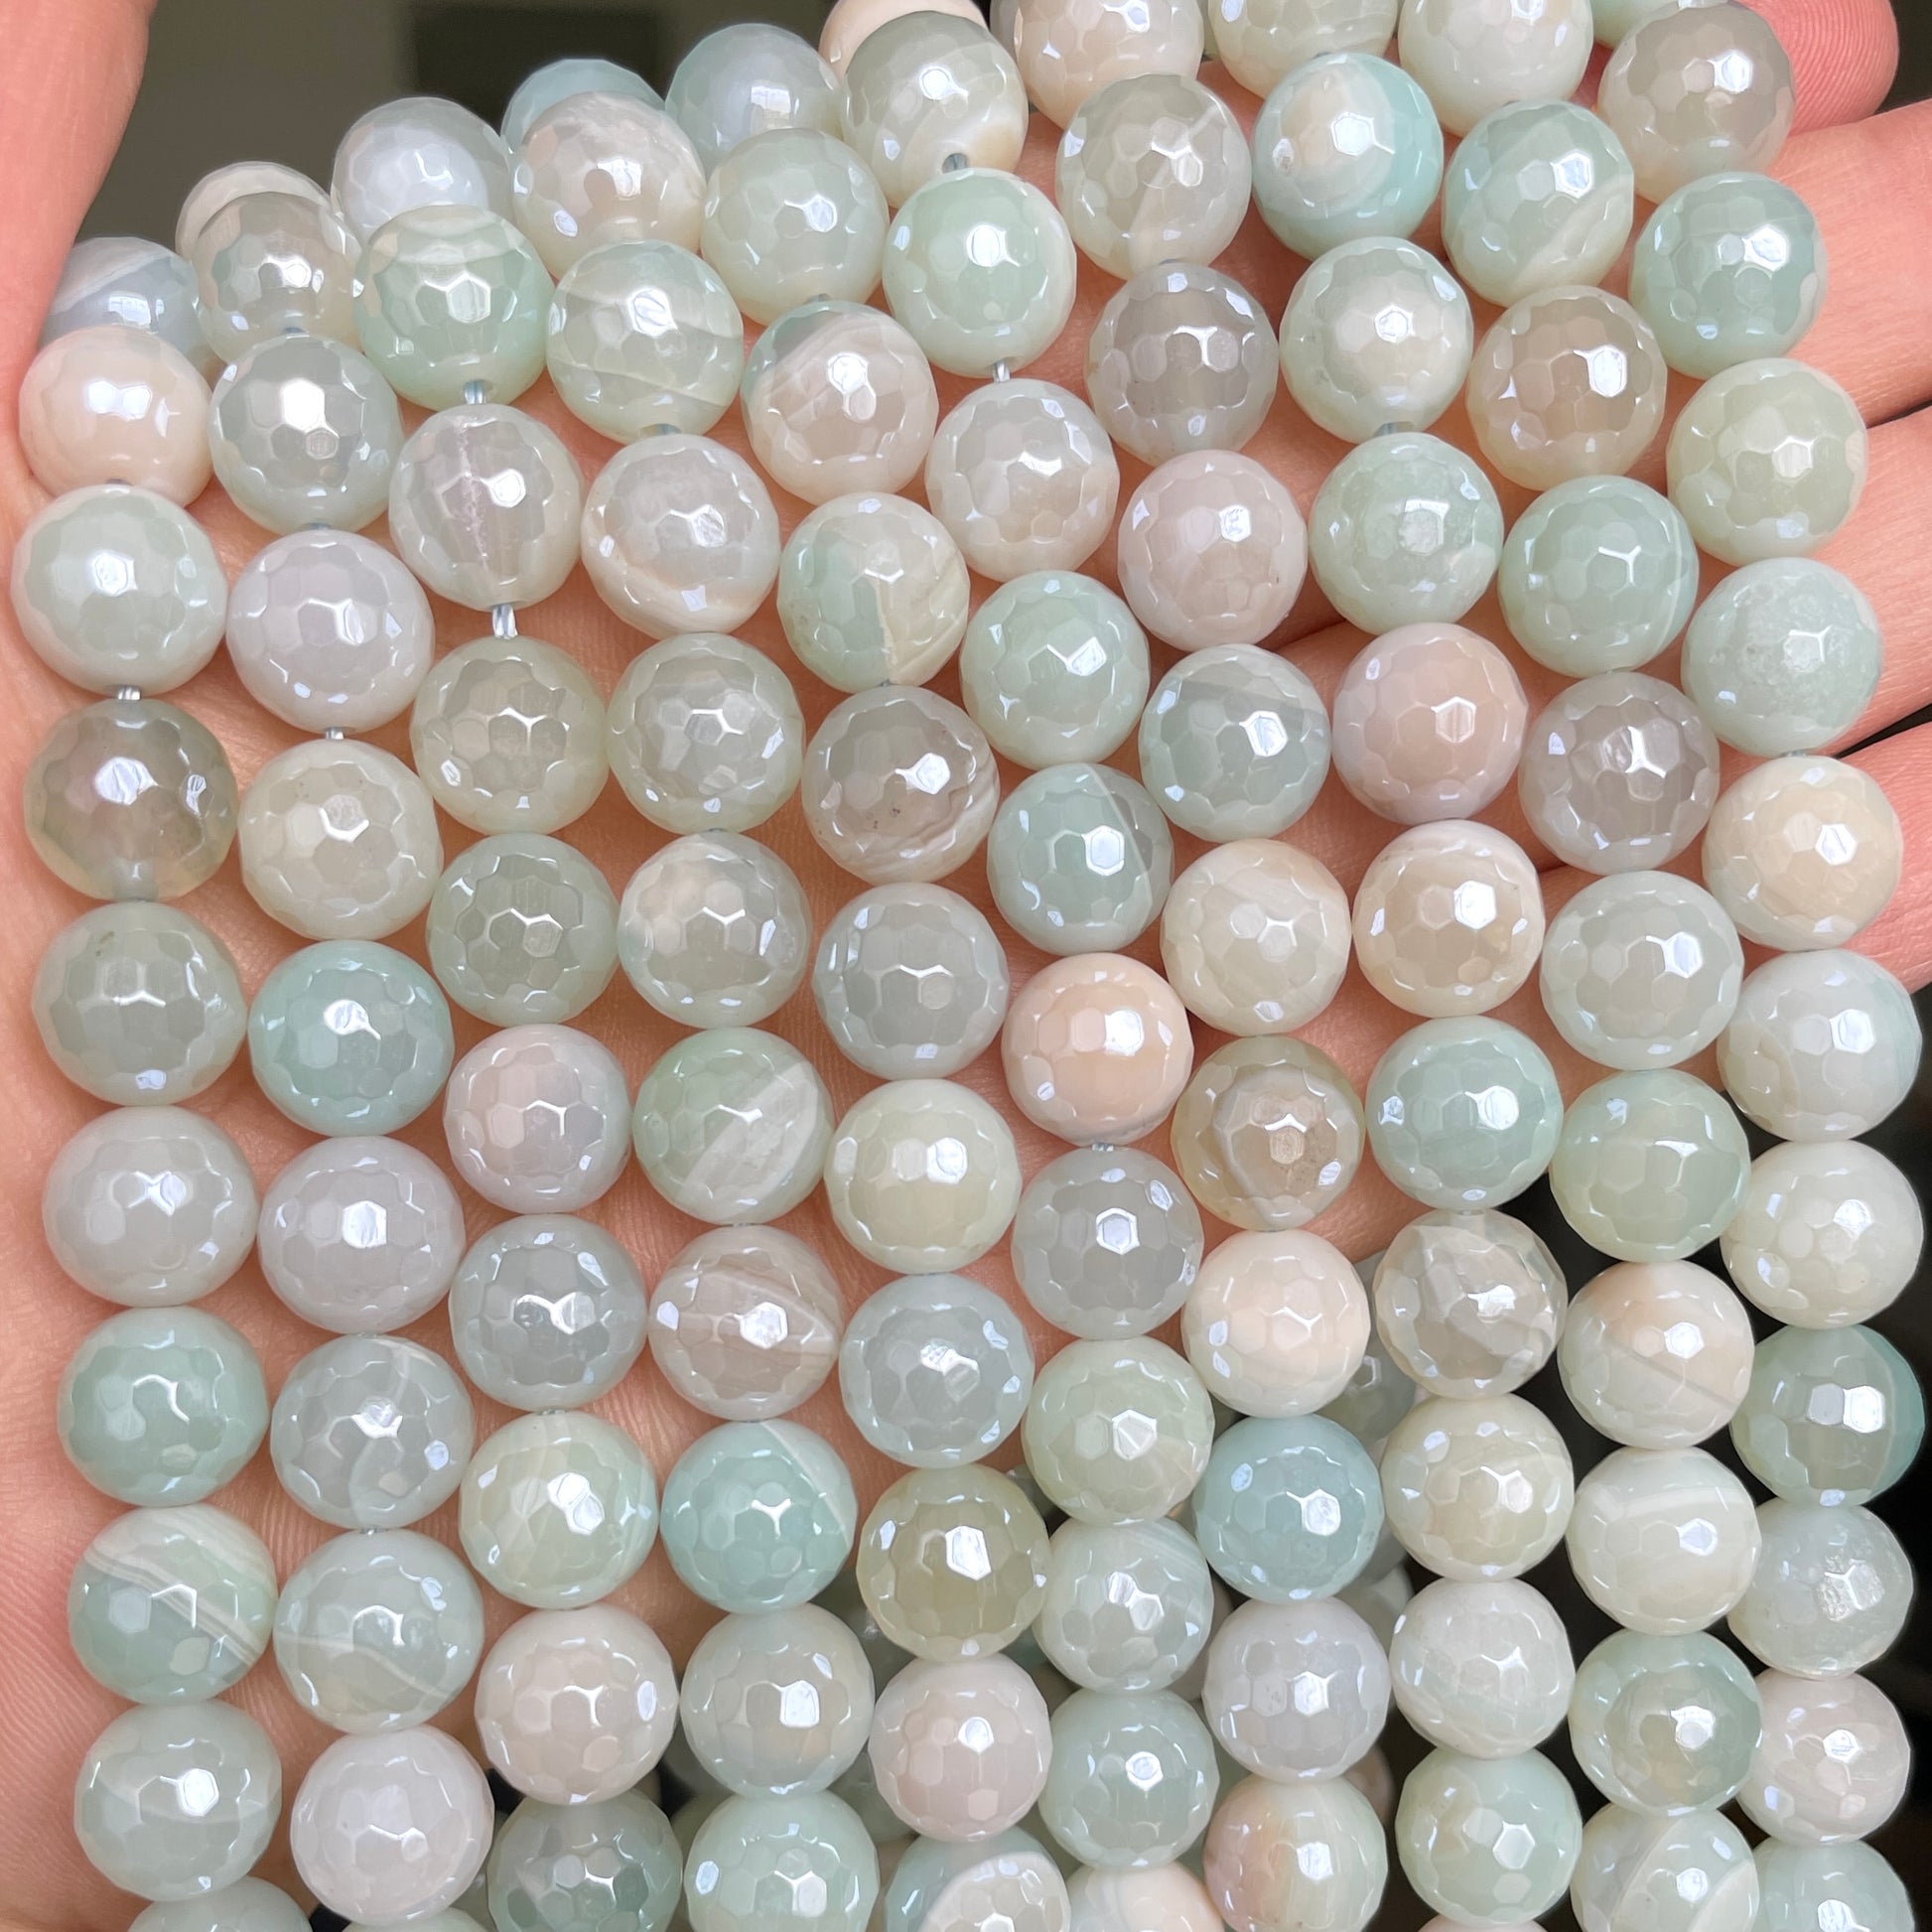 10, 12mm Electroplated Light Blue Banded Agate Stone Faceted Beads-Grade A Premium Quality Electroplated Beads 12mm Stone Beads New Beads Arrivals Premium Quality Agate Beads Charms Beads Beyond